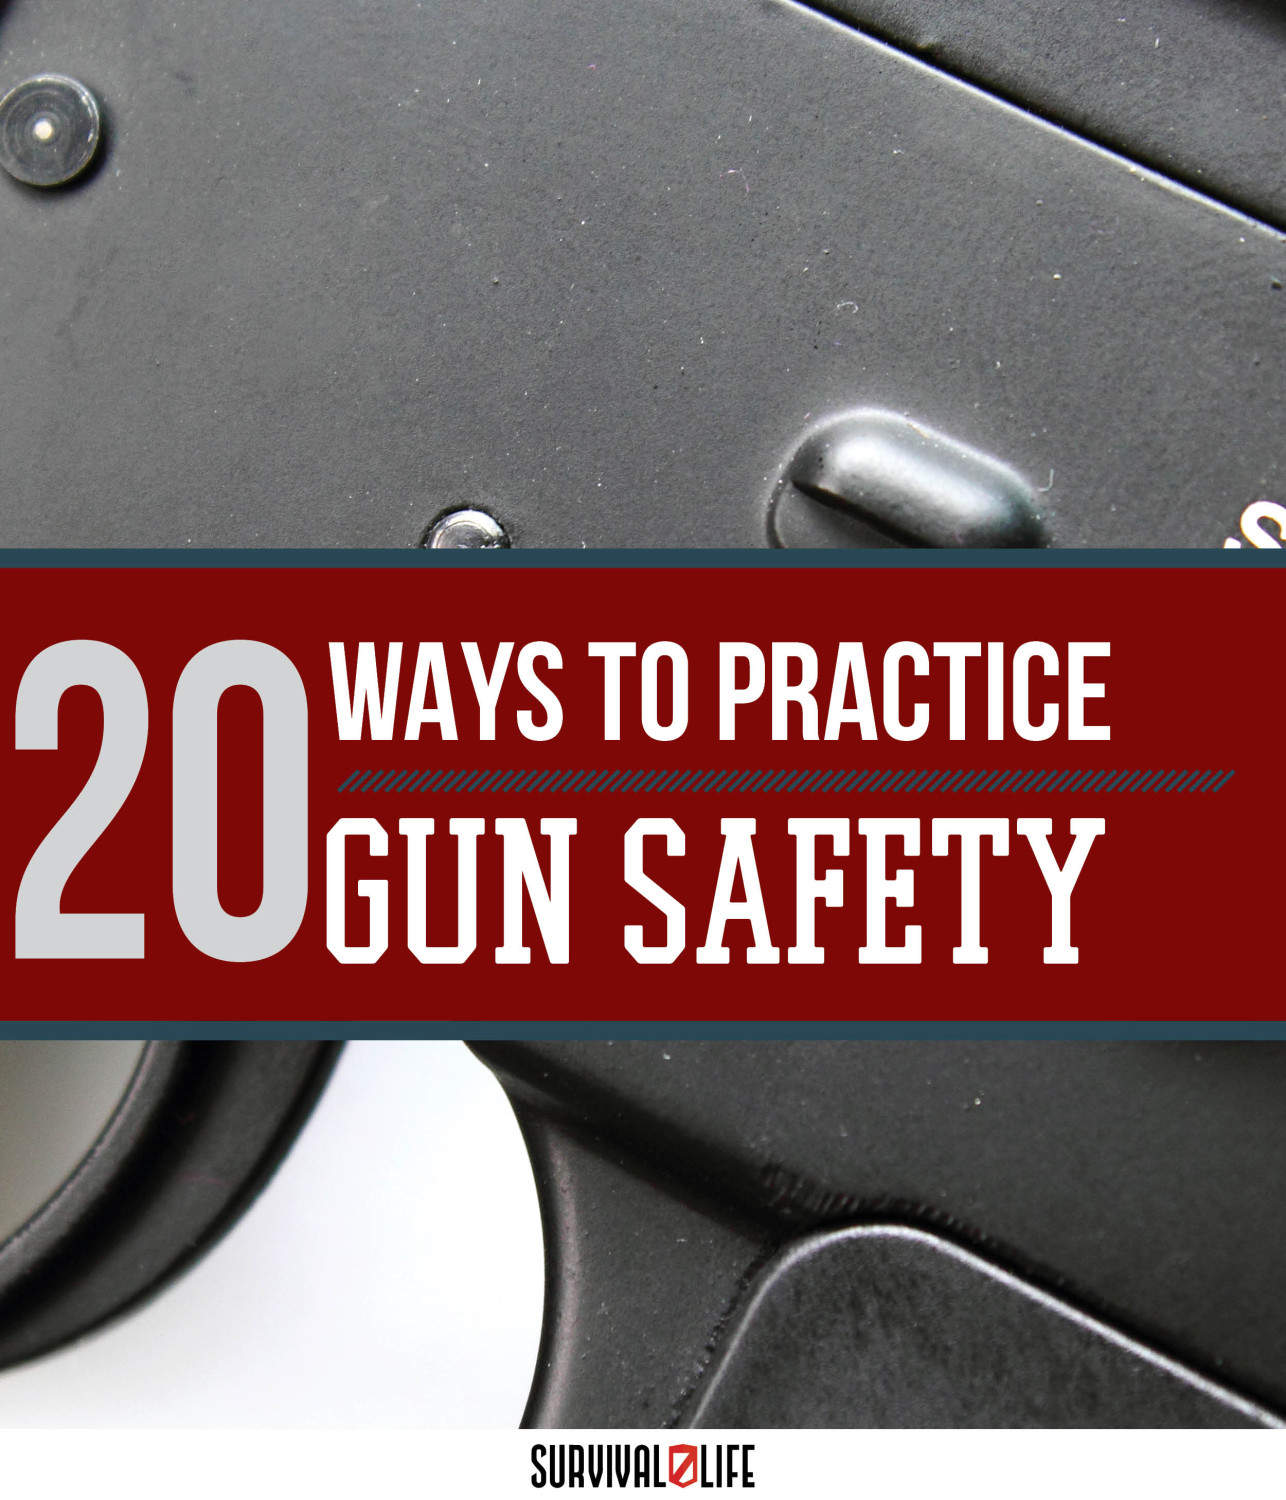 20 Firearm Safety Tips by Survival Life at http://survivallife.com/2015/05/11/20-firearm-safety-tips/